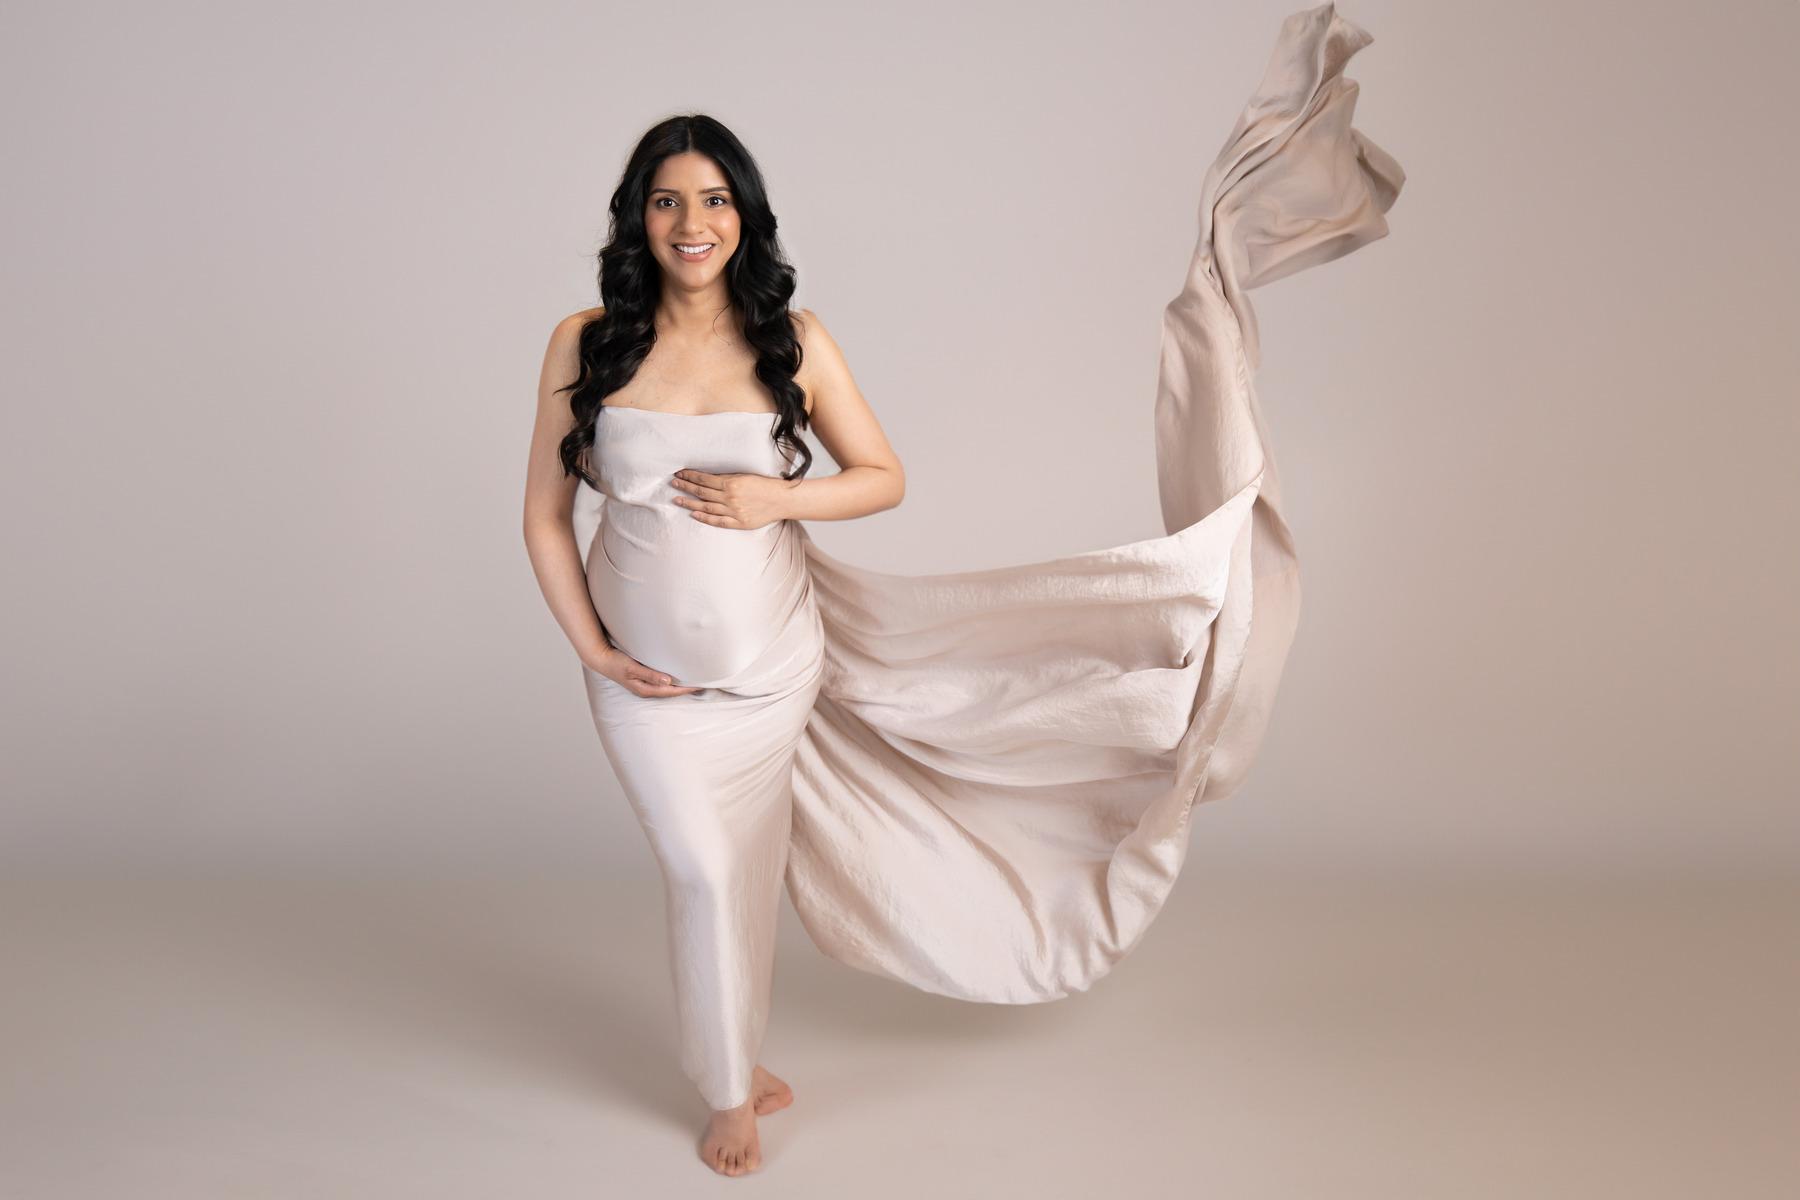 "A glowing pregnant woman wrapped in cream silk, captured by Ceire Rhein, Dublin's maternity photographer."